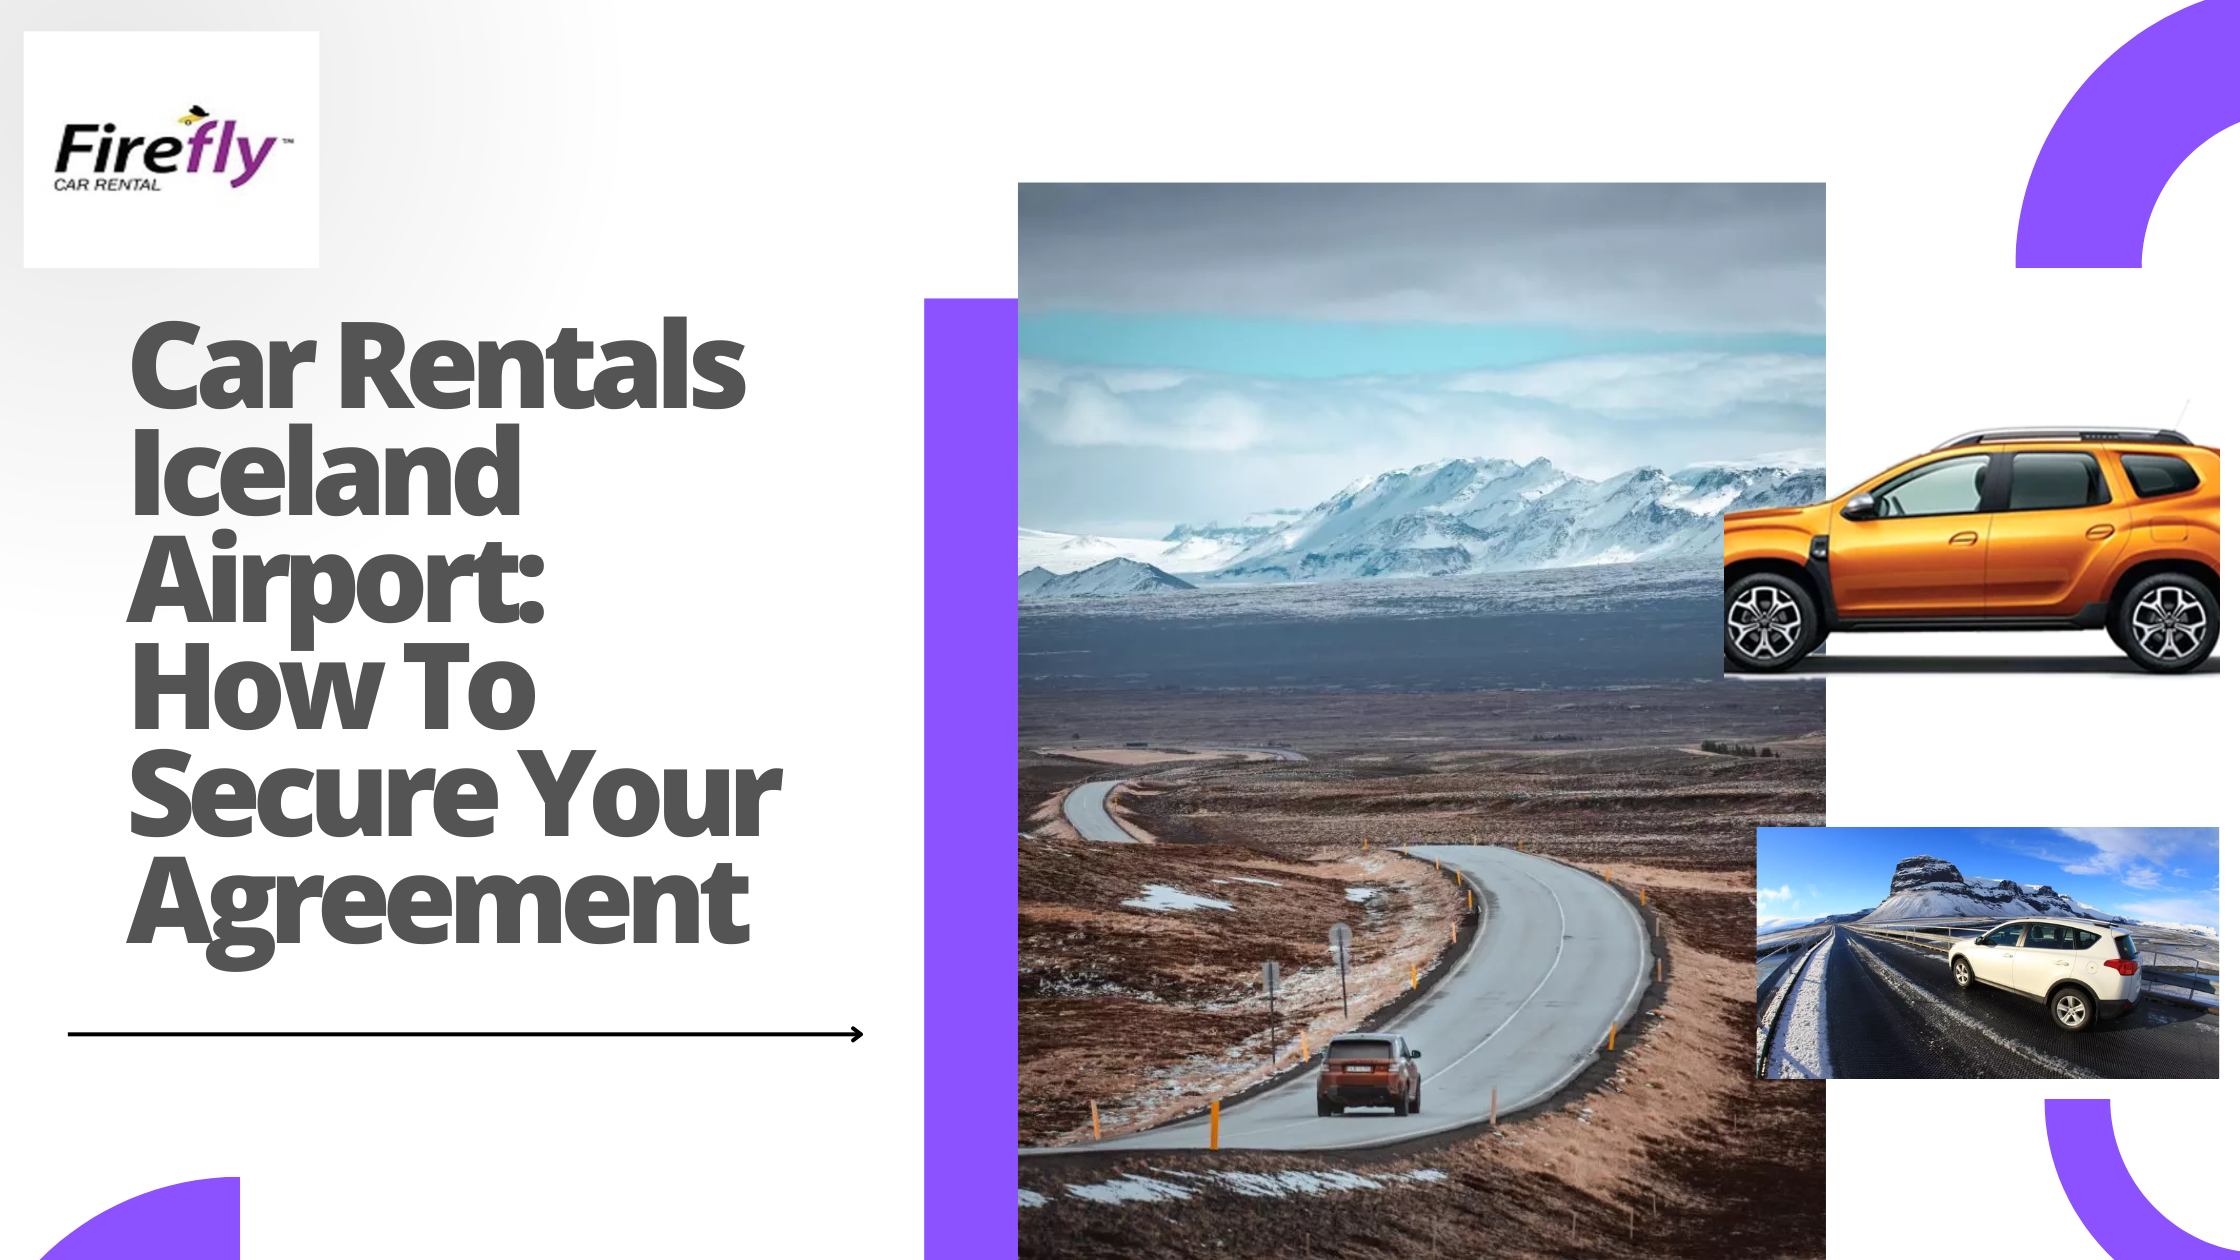 Car Rentals Iceland Airport: How To Secure Your Agreement – Site Title